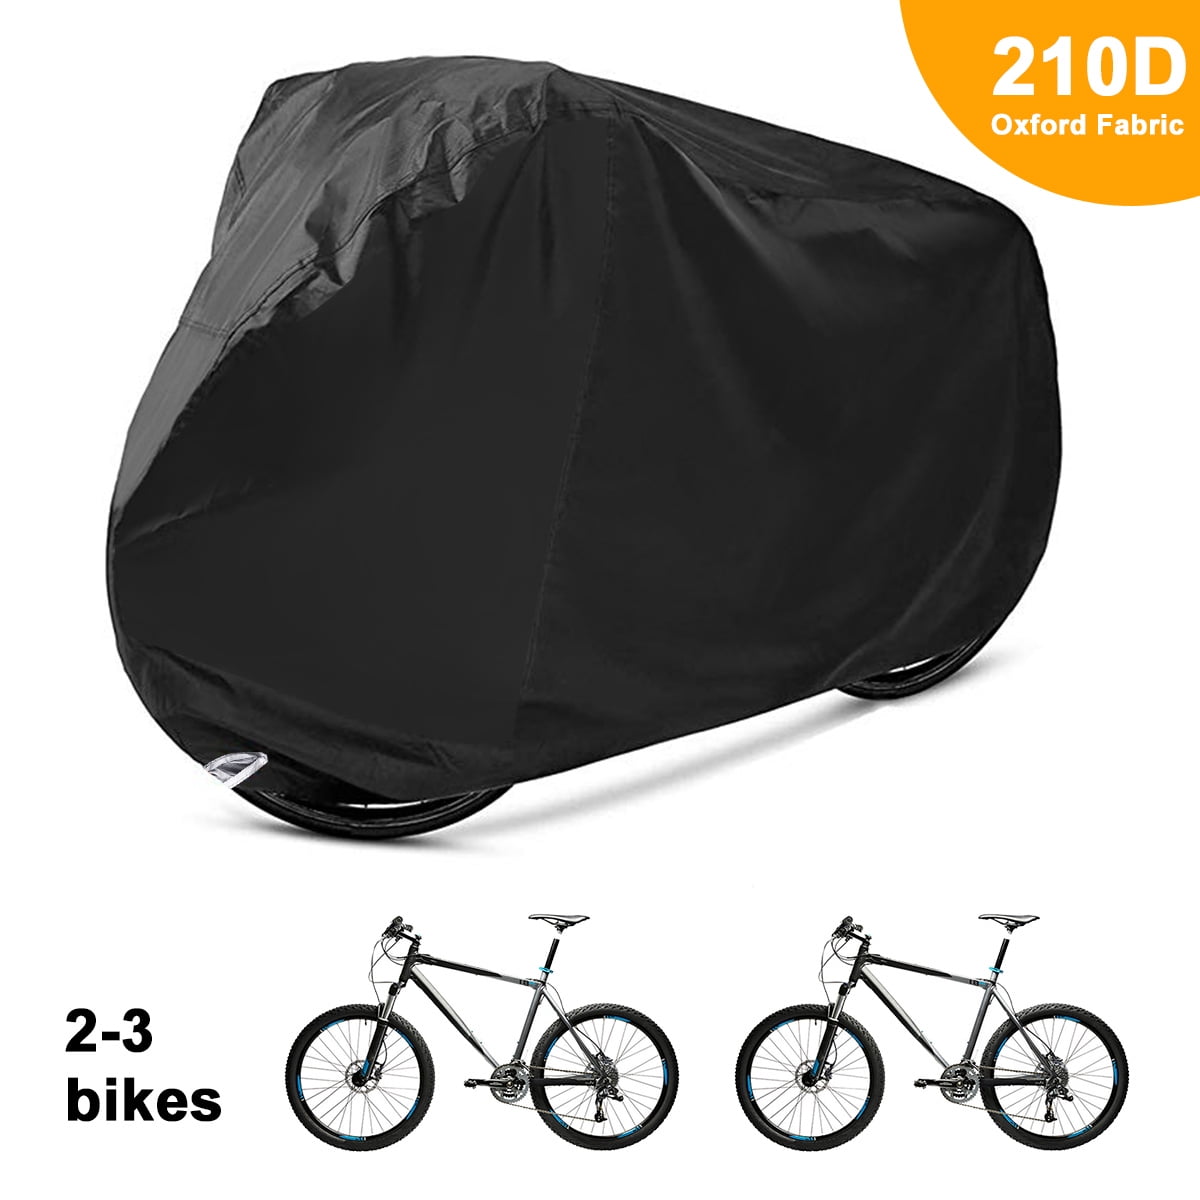 InnoGear Bike Cover Waterproof Bicycle Cover 210D Oxford Fabric Heavy Duty Anti Dust Rain Cover with UV Protection Lock Hole Storage Bag for Mountain Road Bike Outdoor Storage 